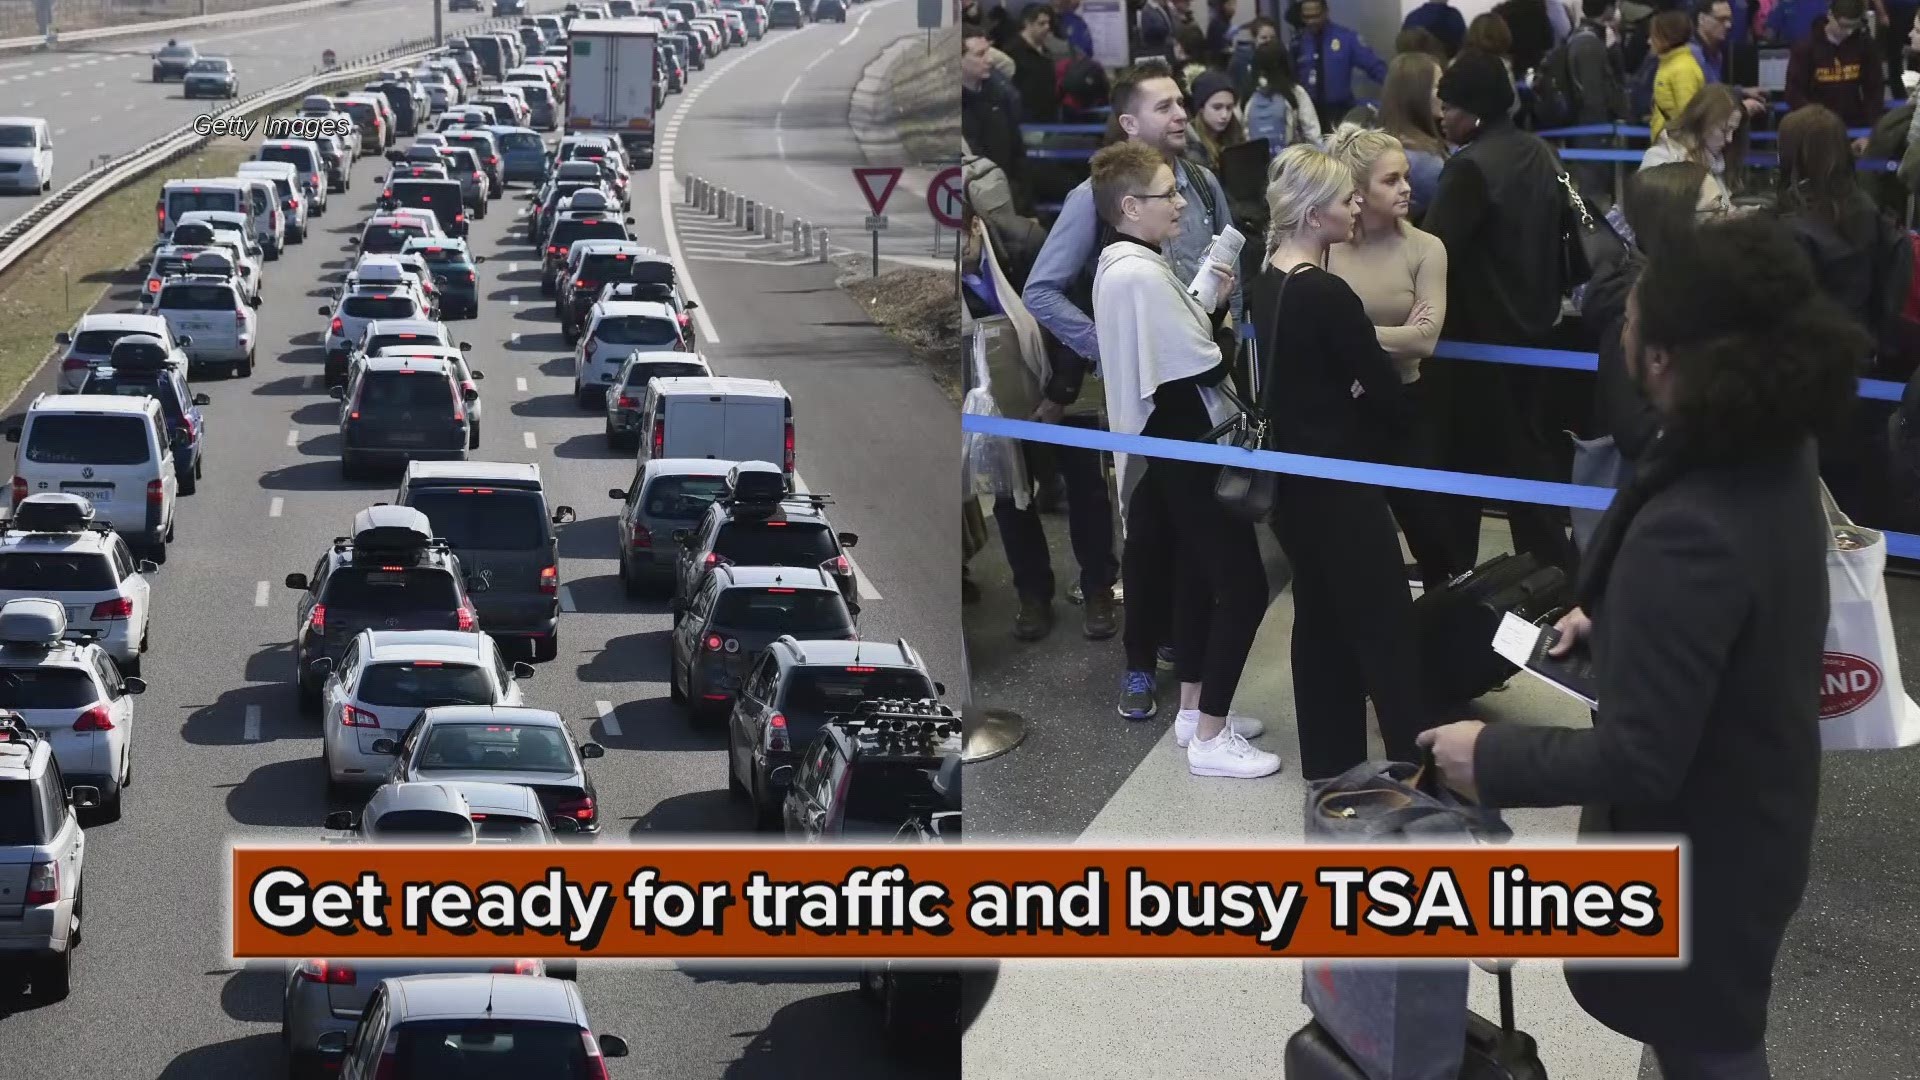 More than 54 million Americans expected to travel this Thanksgiving